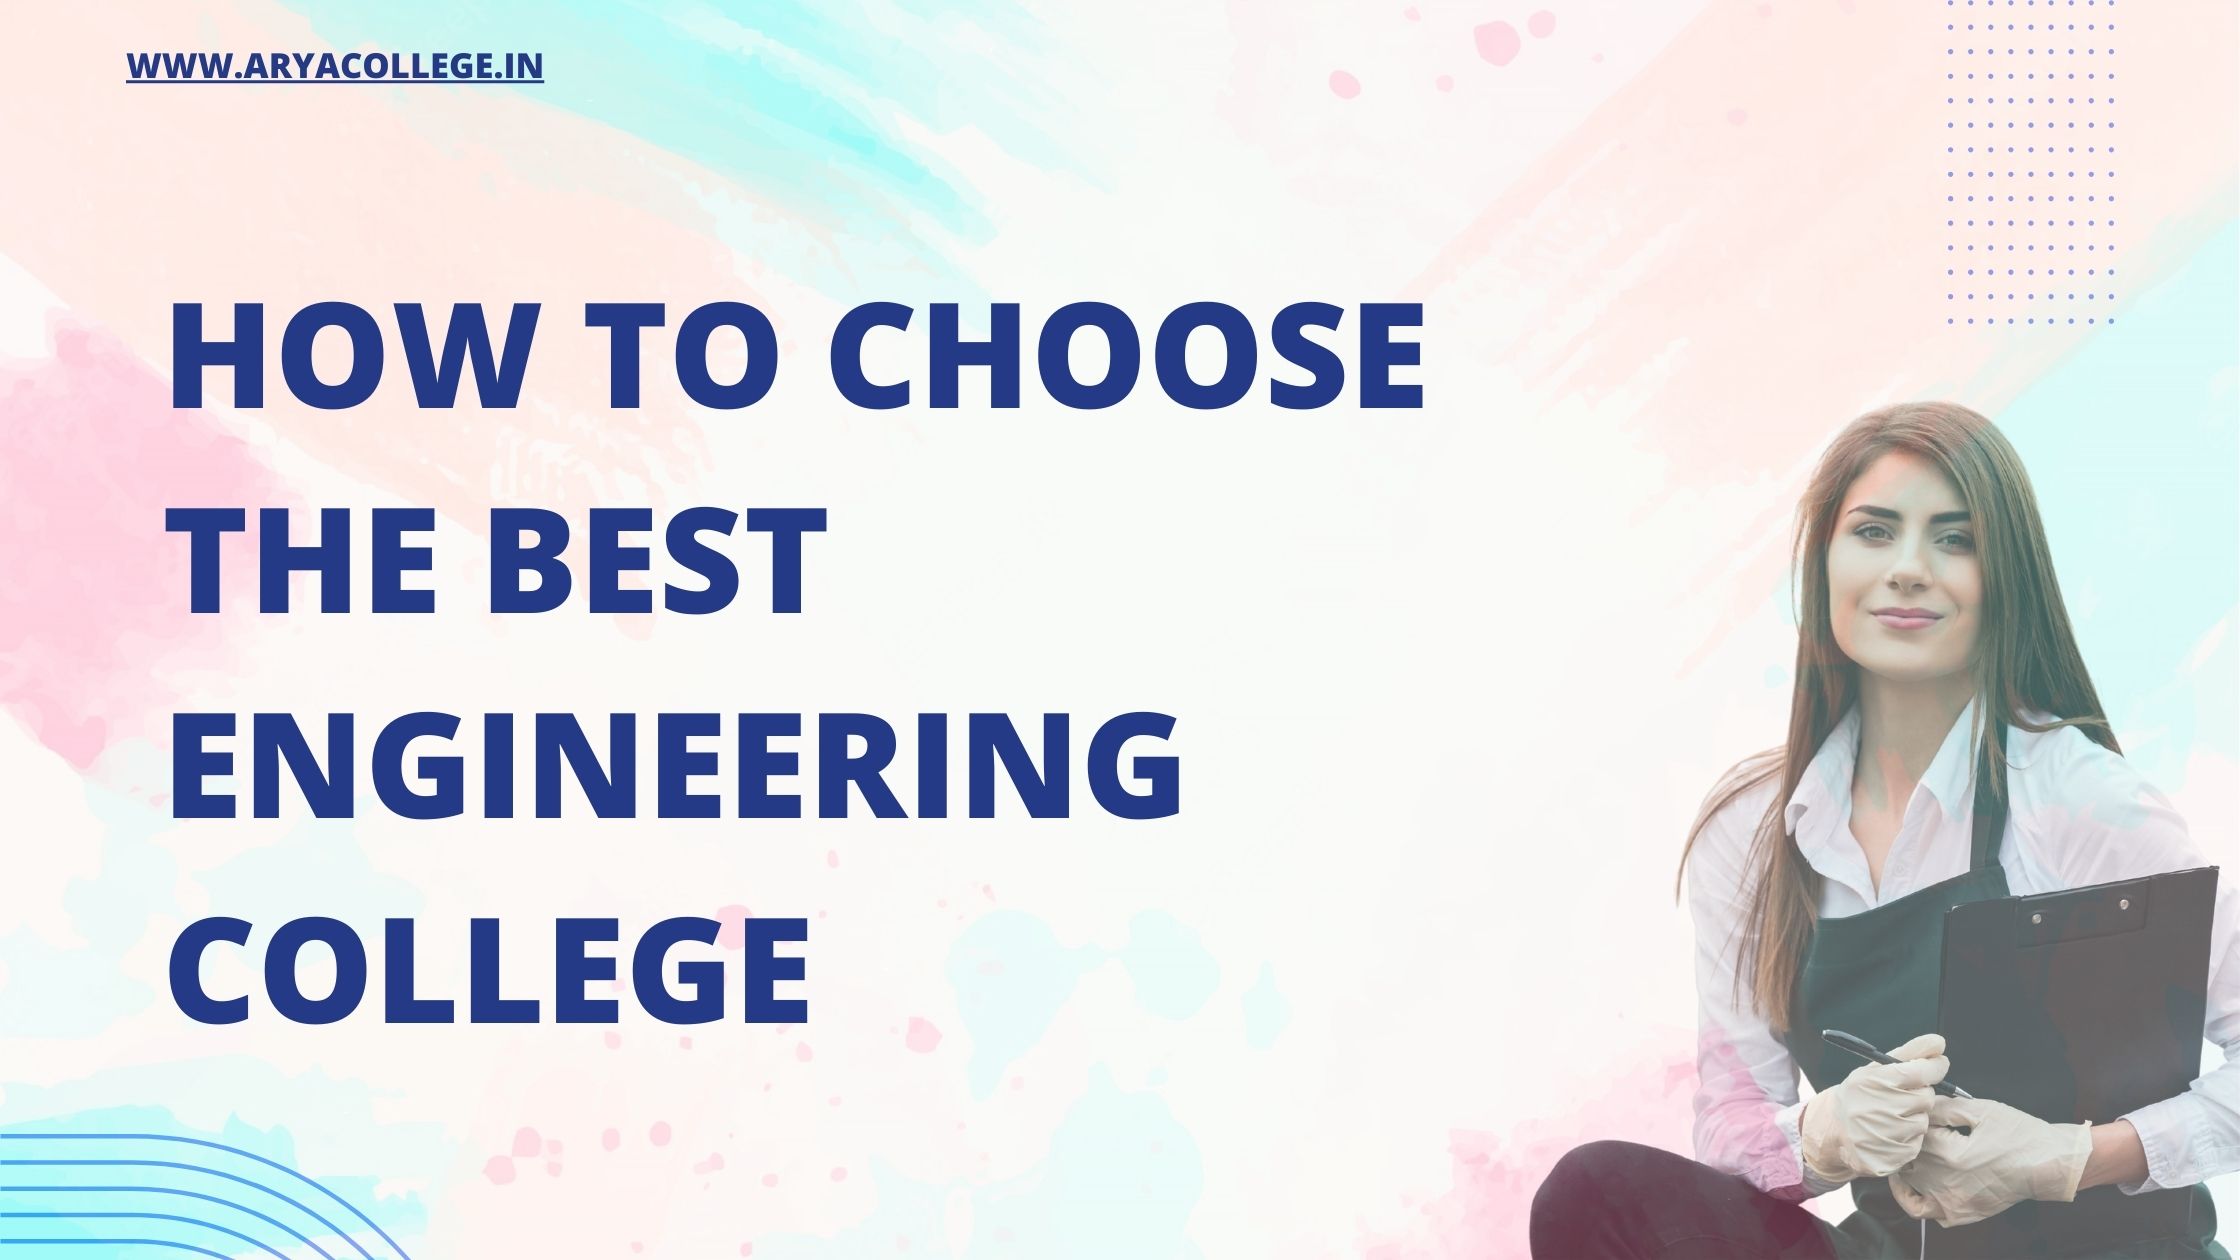 How to Choose the Best Engineering College